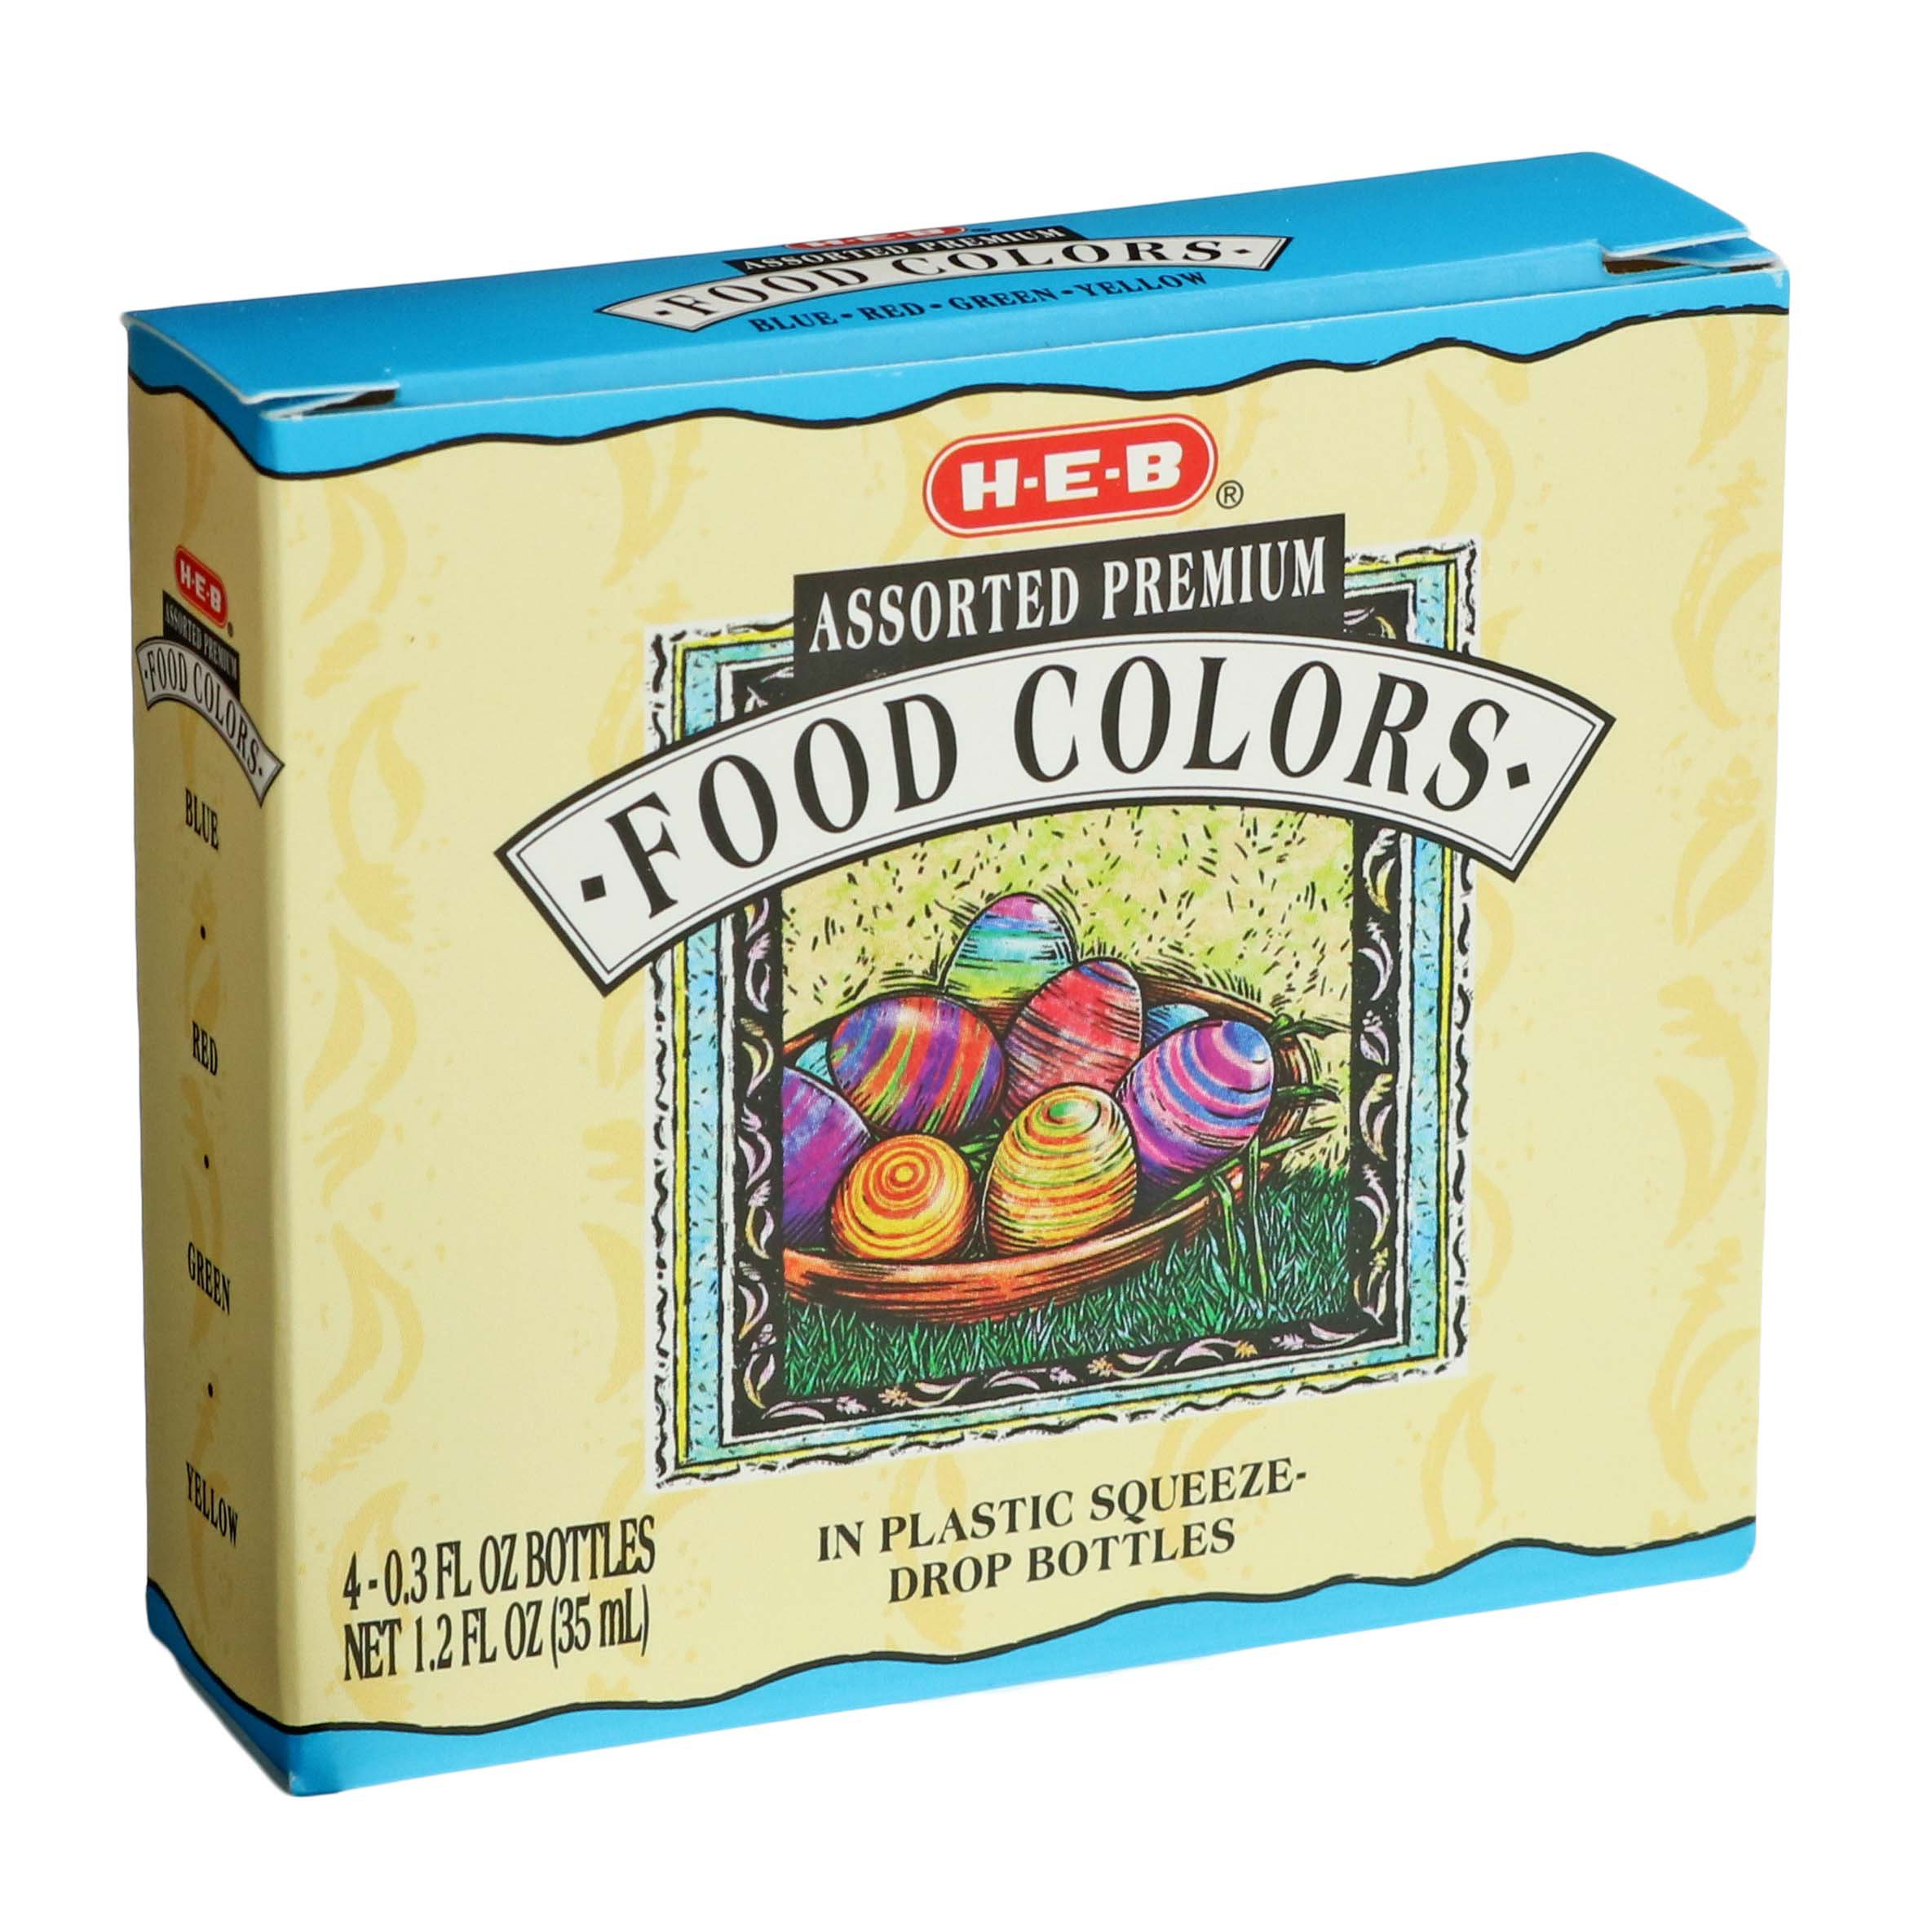 Watkins Assorted Food Coloring, 1.2 fl oz (Plastic Container